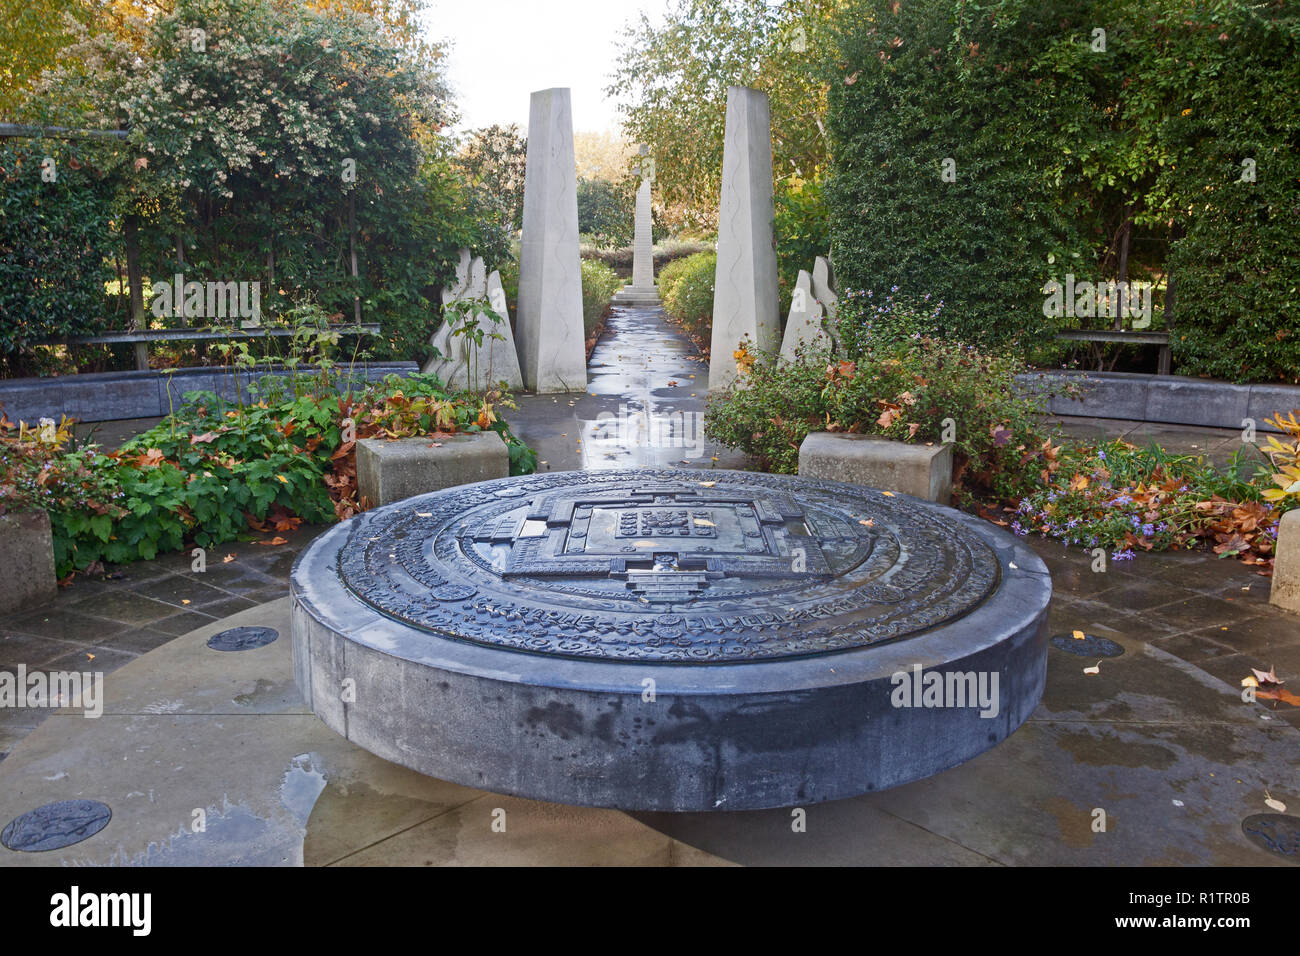 London, Lambeth. The Tibetan Peace Garden close to the Imperial War Museum. In the foreground is the black limestone Kalachakra Mandala. Stock Photo